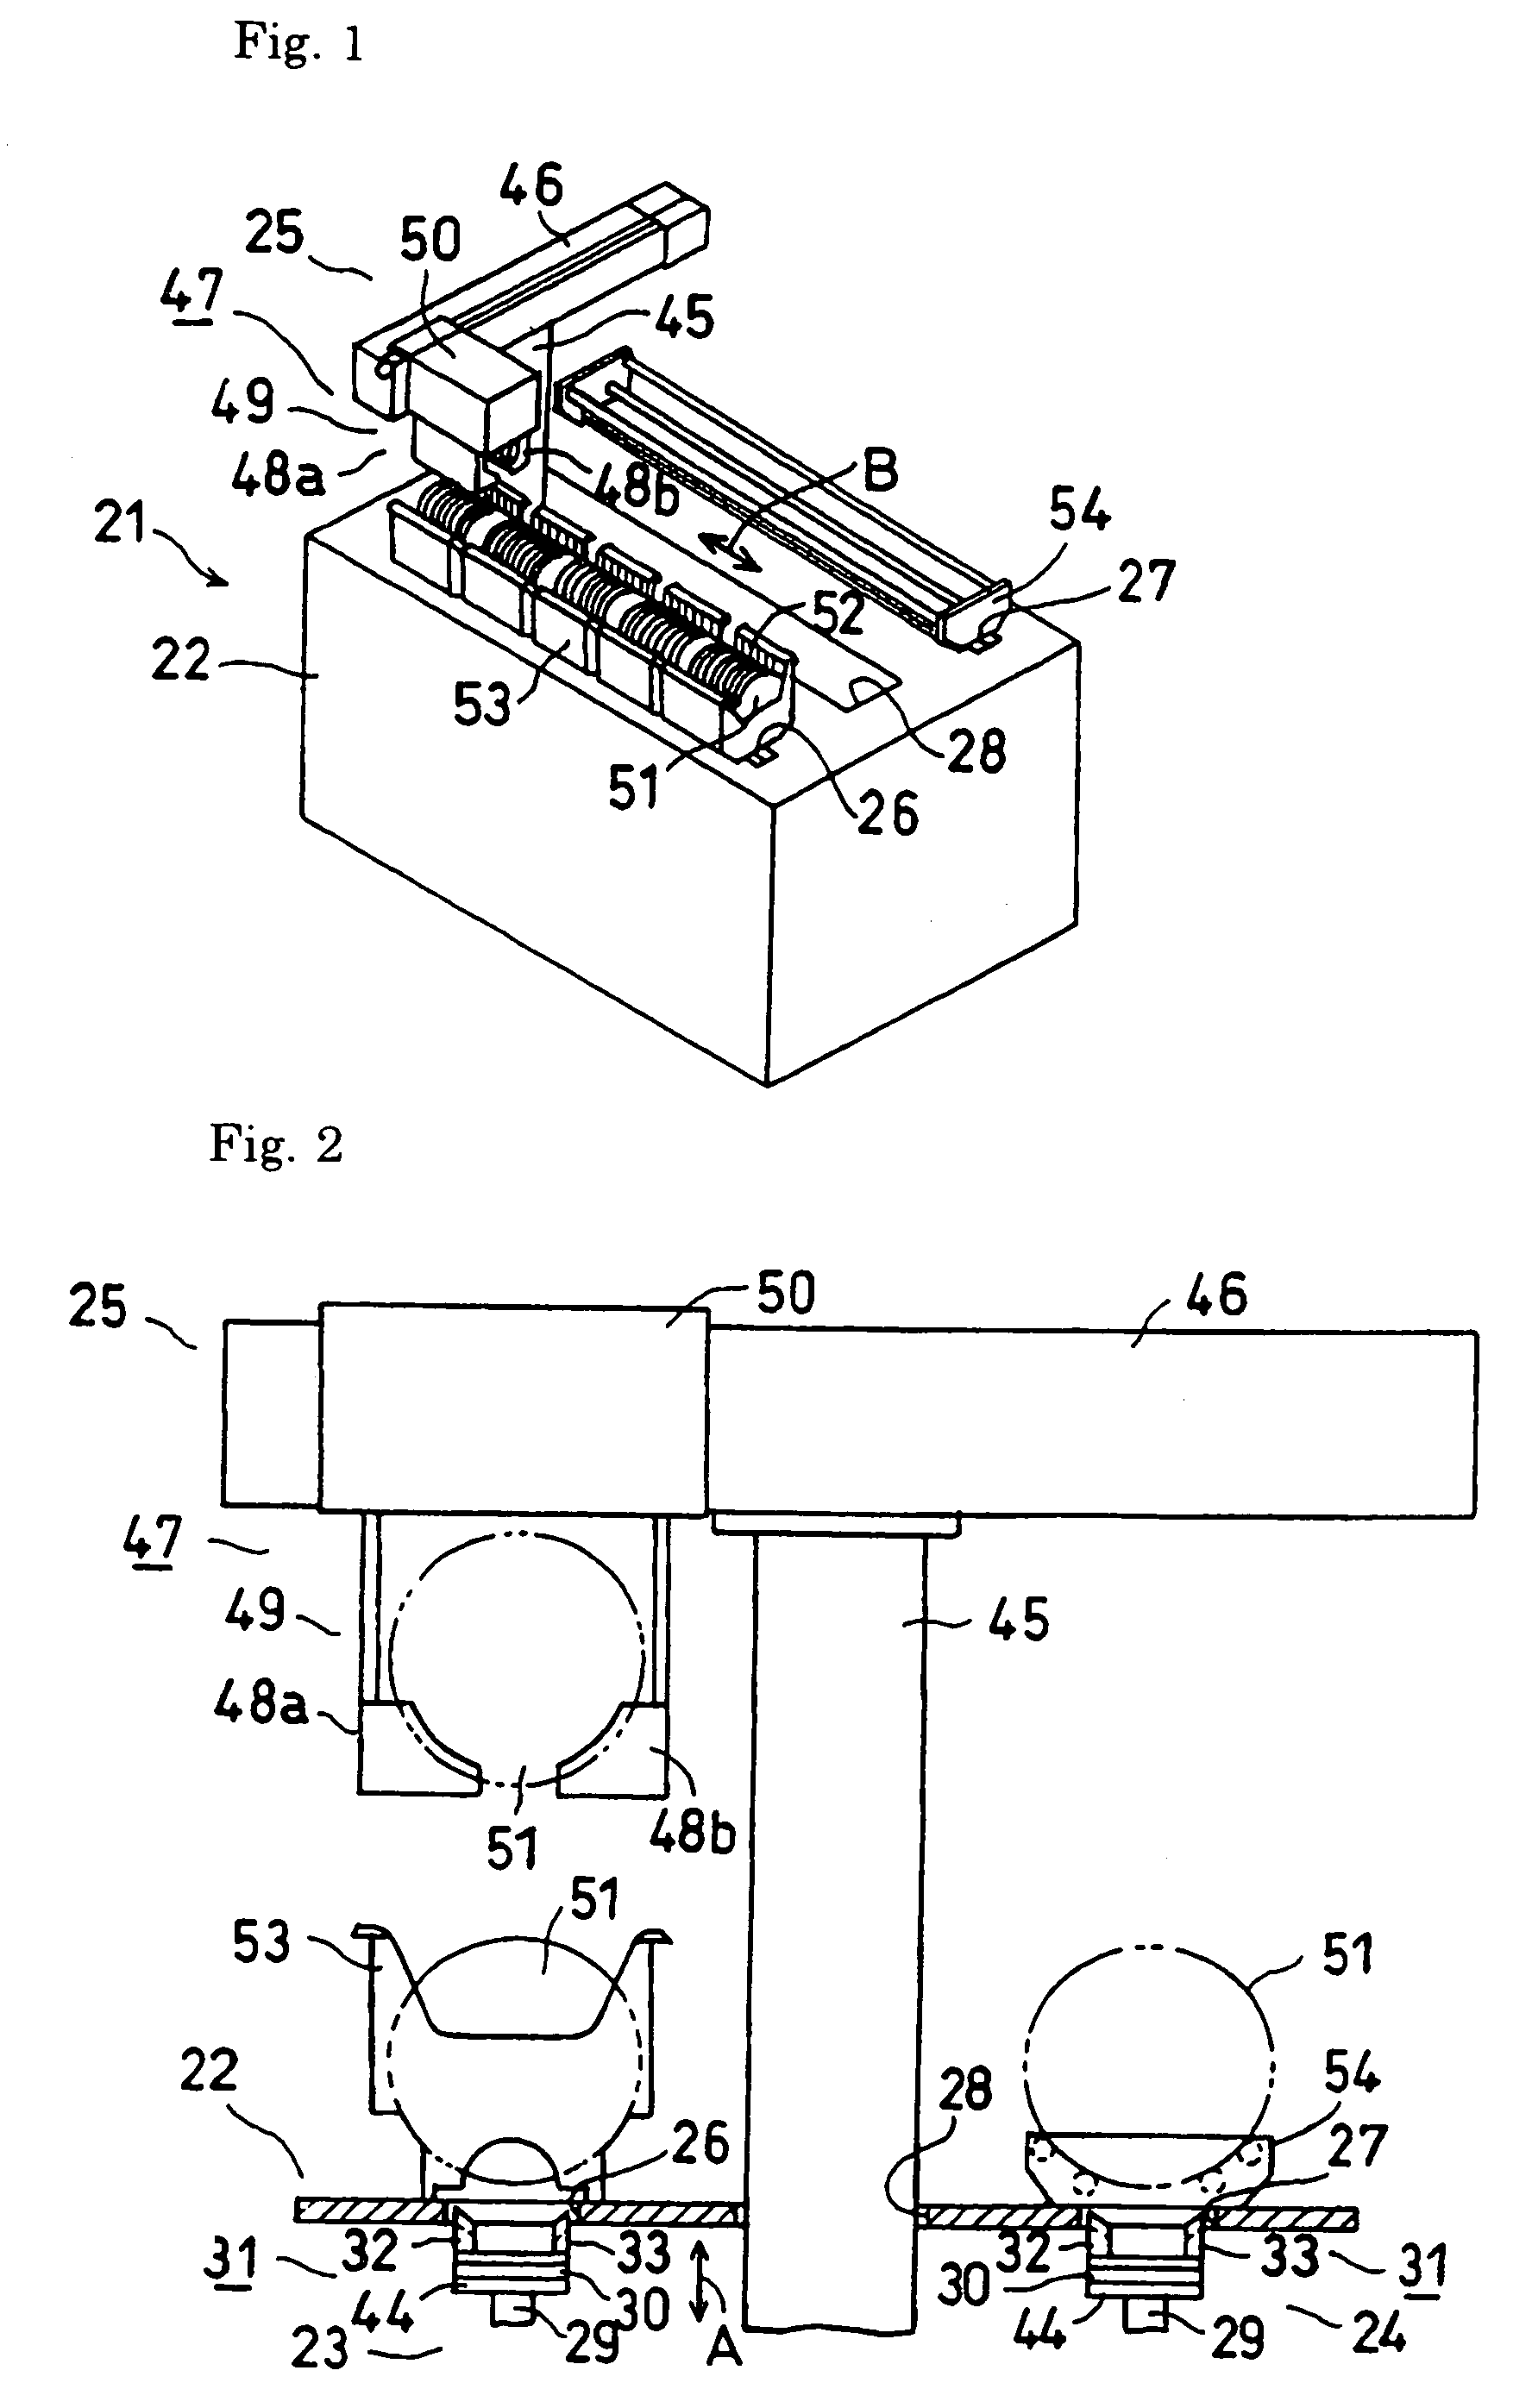 Wafer transfer equipment and semiconductor device manufacturing apparatus using wafer transfer equipment